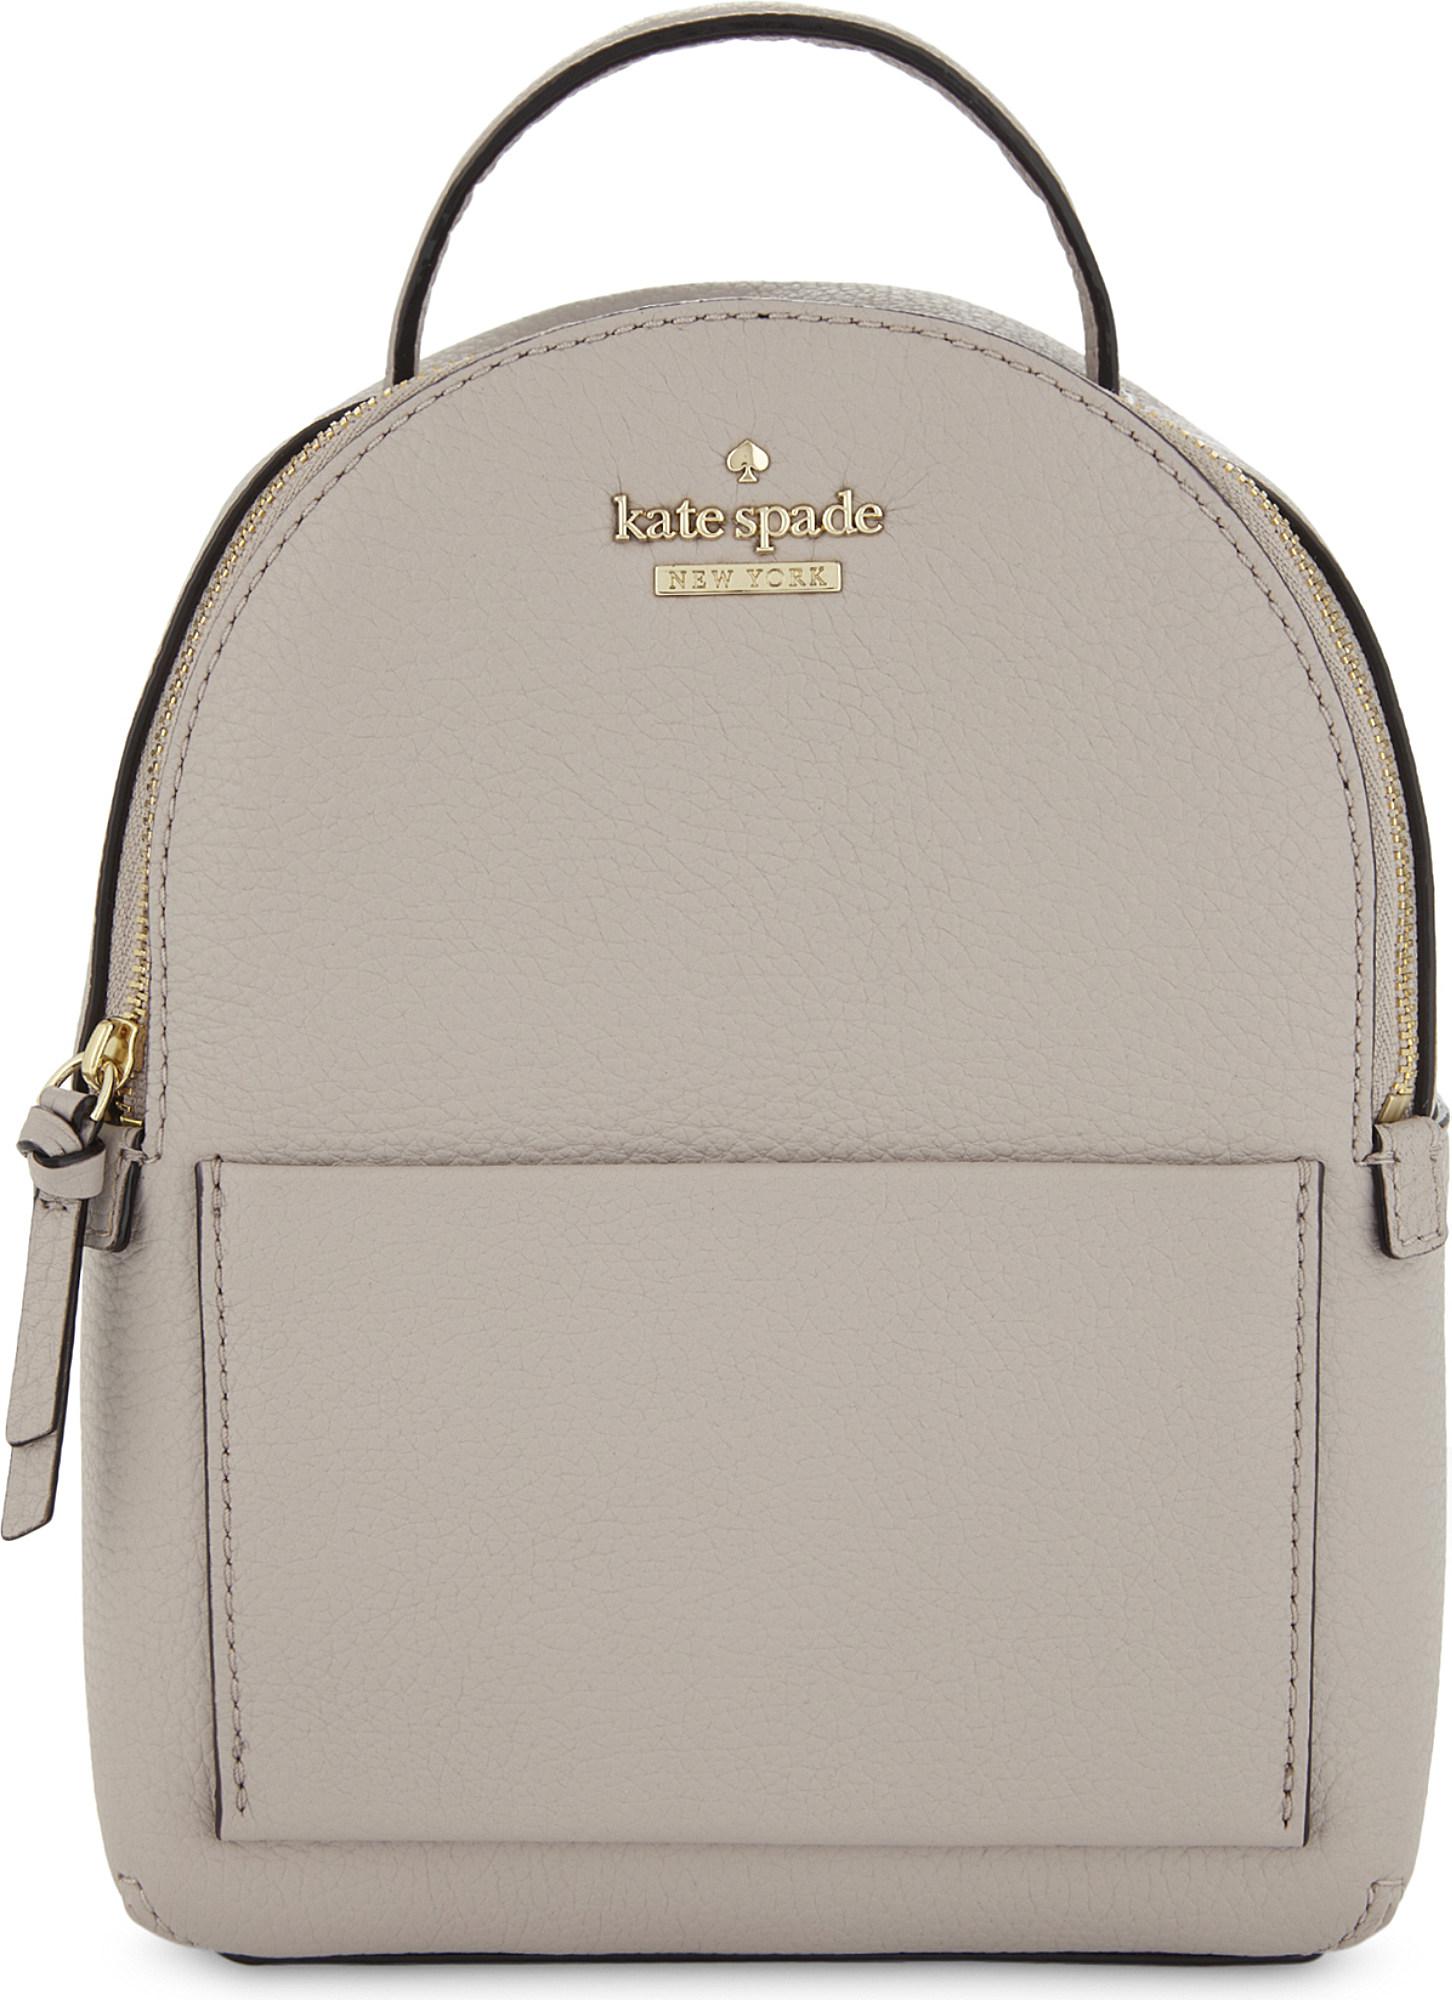 Kate Spade Jackson Street Merry Mini Leather Backpack in Gray | Lyst